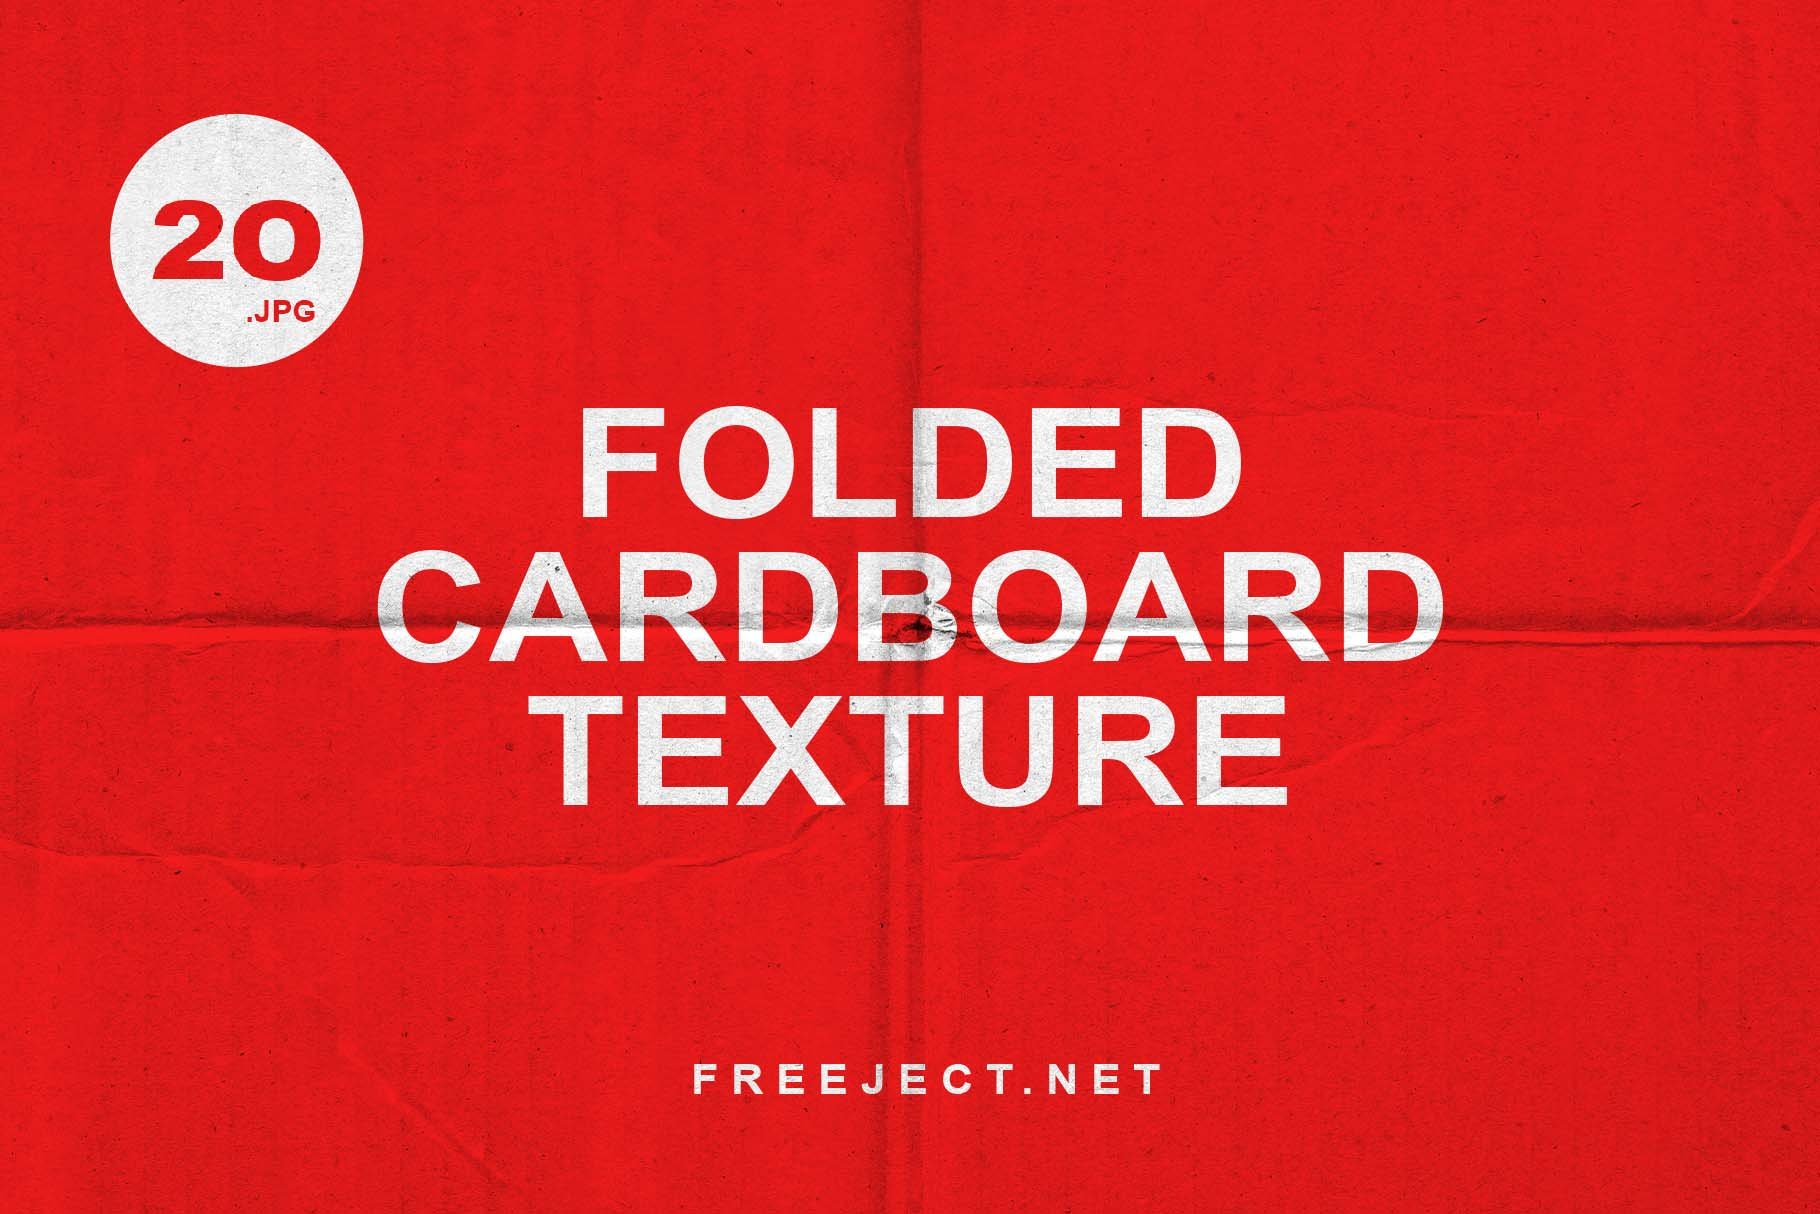 Folded Cardboard Texture Overlay cover image.